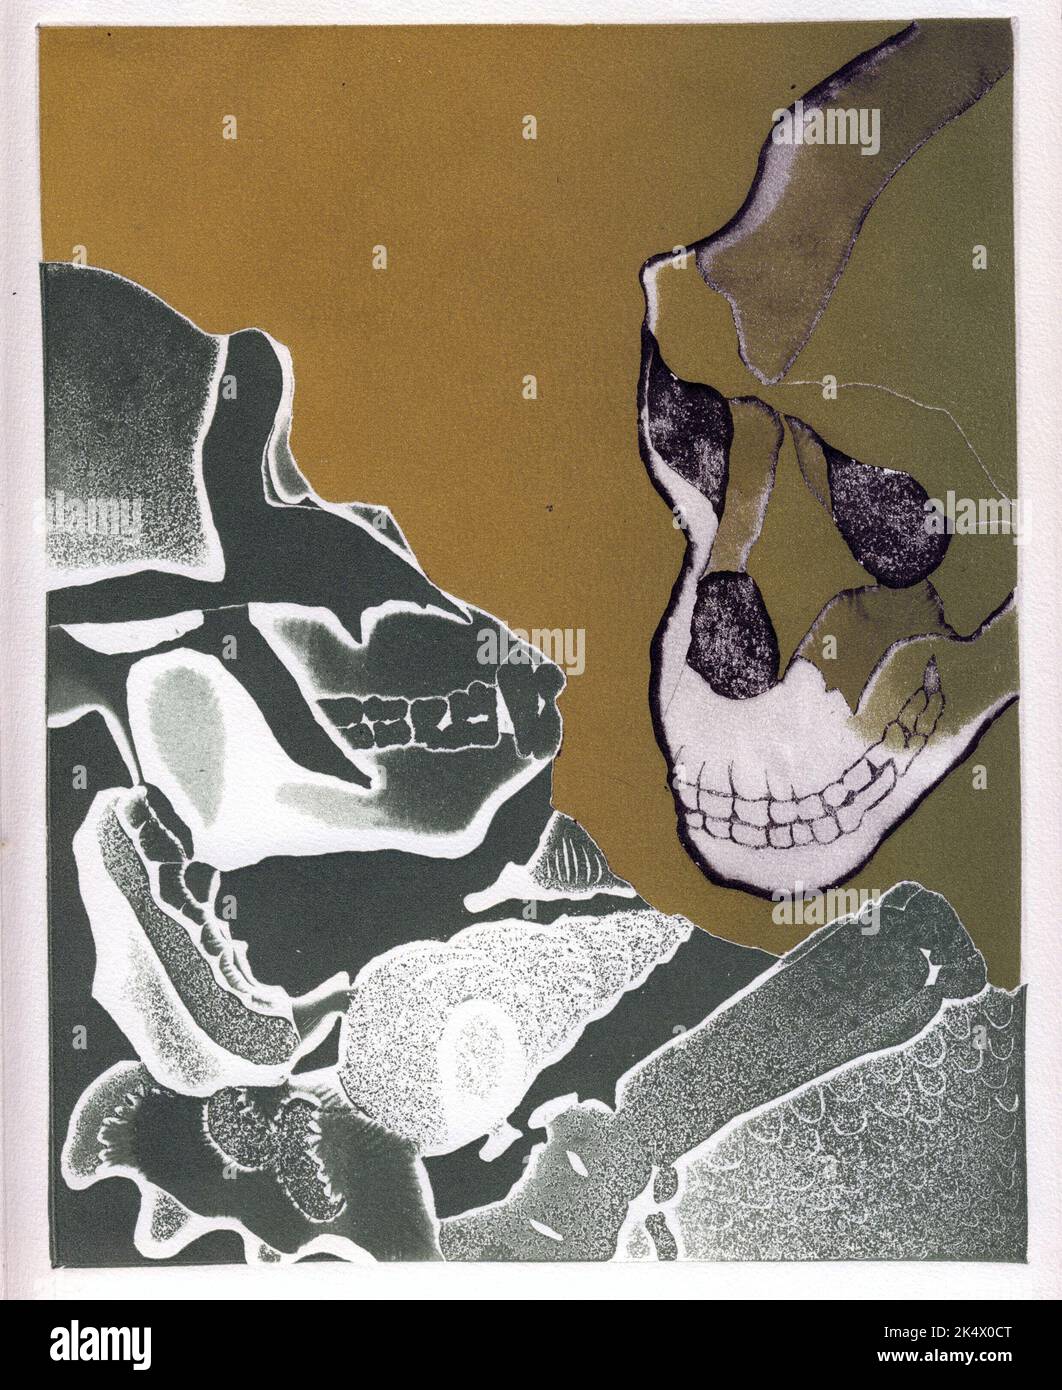 4 of 4 etchings showing two gorilla /hominid skulls, suitable for book cover, magazine art, evolution, biology, zoology, anthropology, history gothic Stock Photo